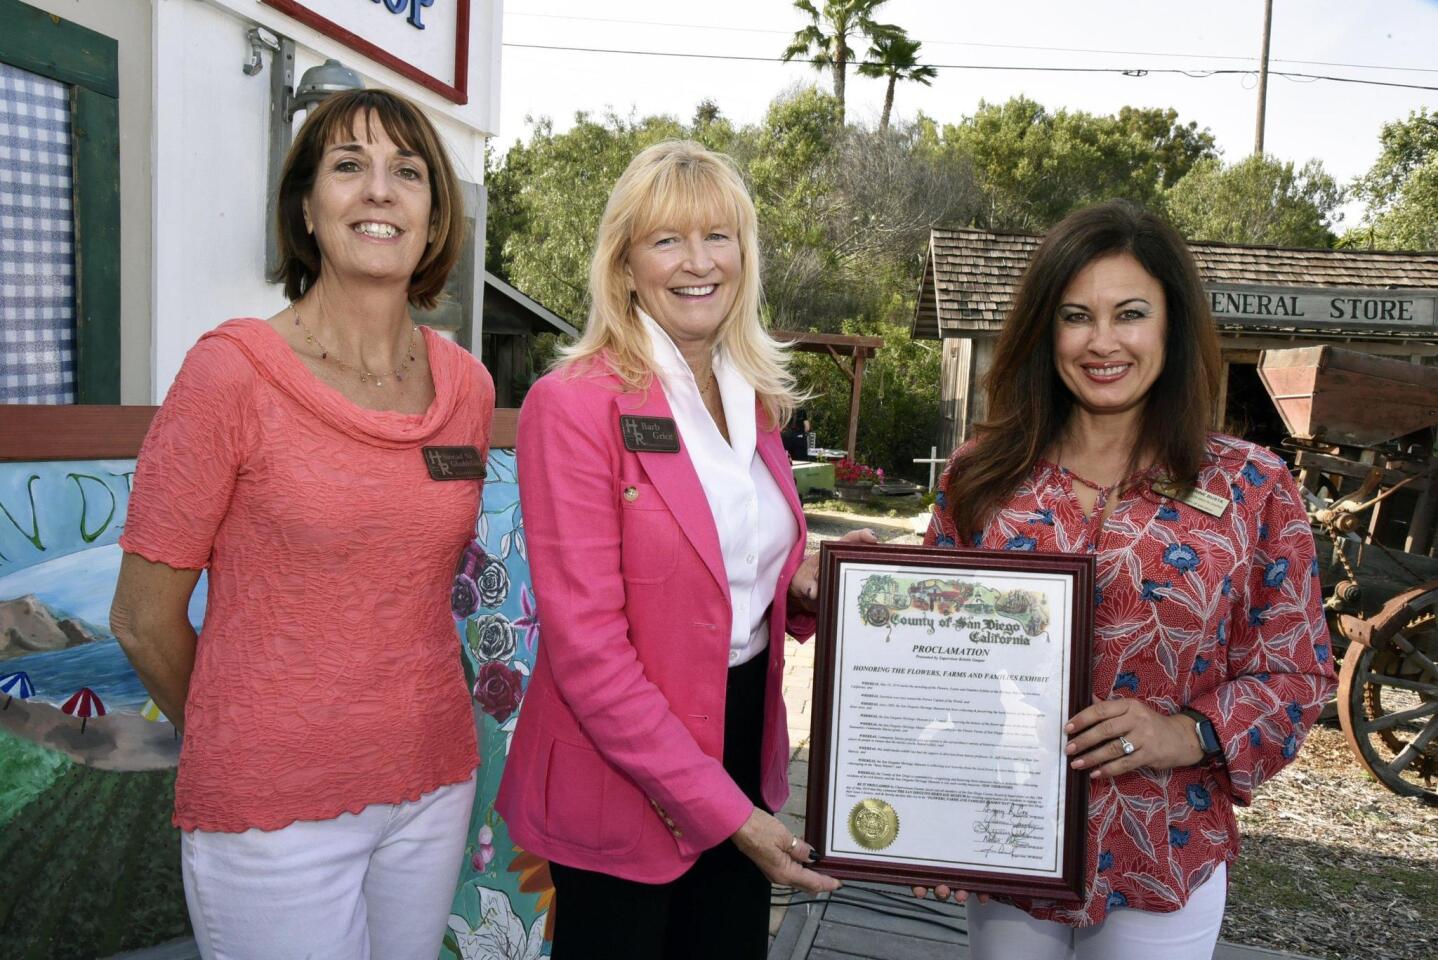 The San Dieguito Heritage Museum Board President Sinéad Ni Chabhláin and Executive Director Barb Grice receive a plaque honoring The Flowers, Farmers, and Families exhibit, presented by Corrine Busta (Policy Advisor representing Supervisor Kristin Gaspar)